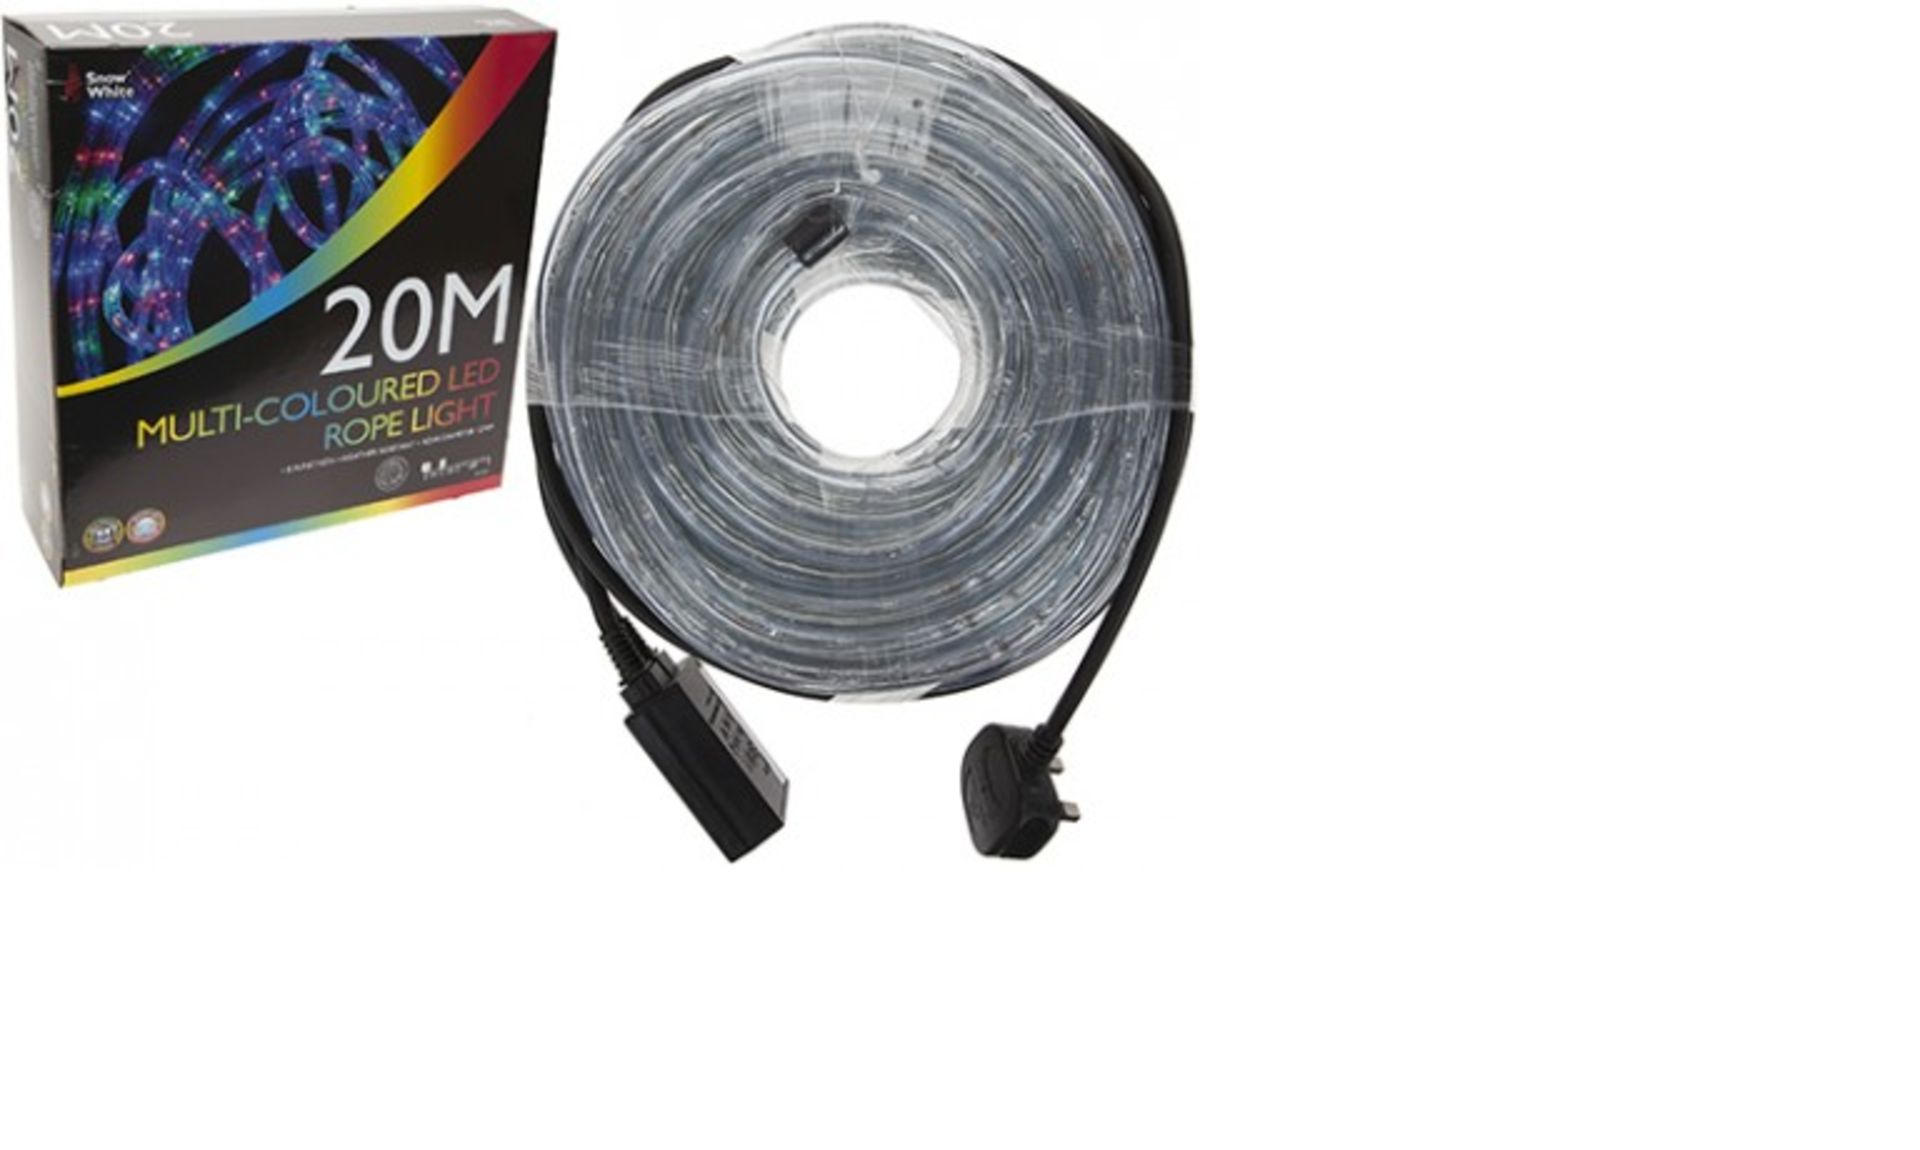 V Brand New 20m Multi-Coloured Eight Function Weather Resistant Rope Light X 2 YOUR BID PRICE TO